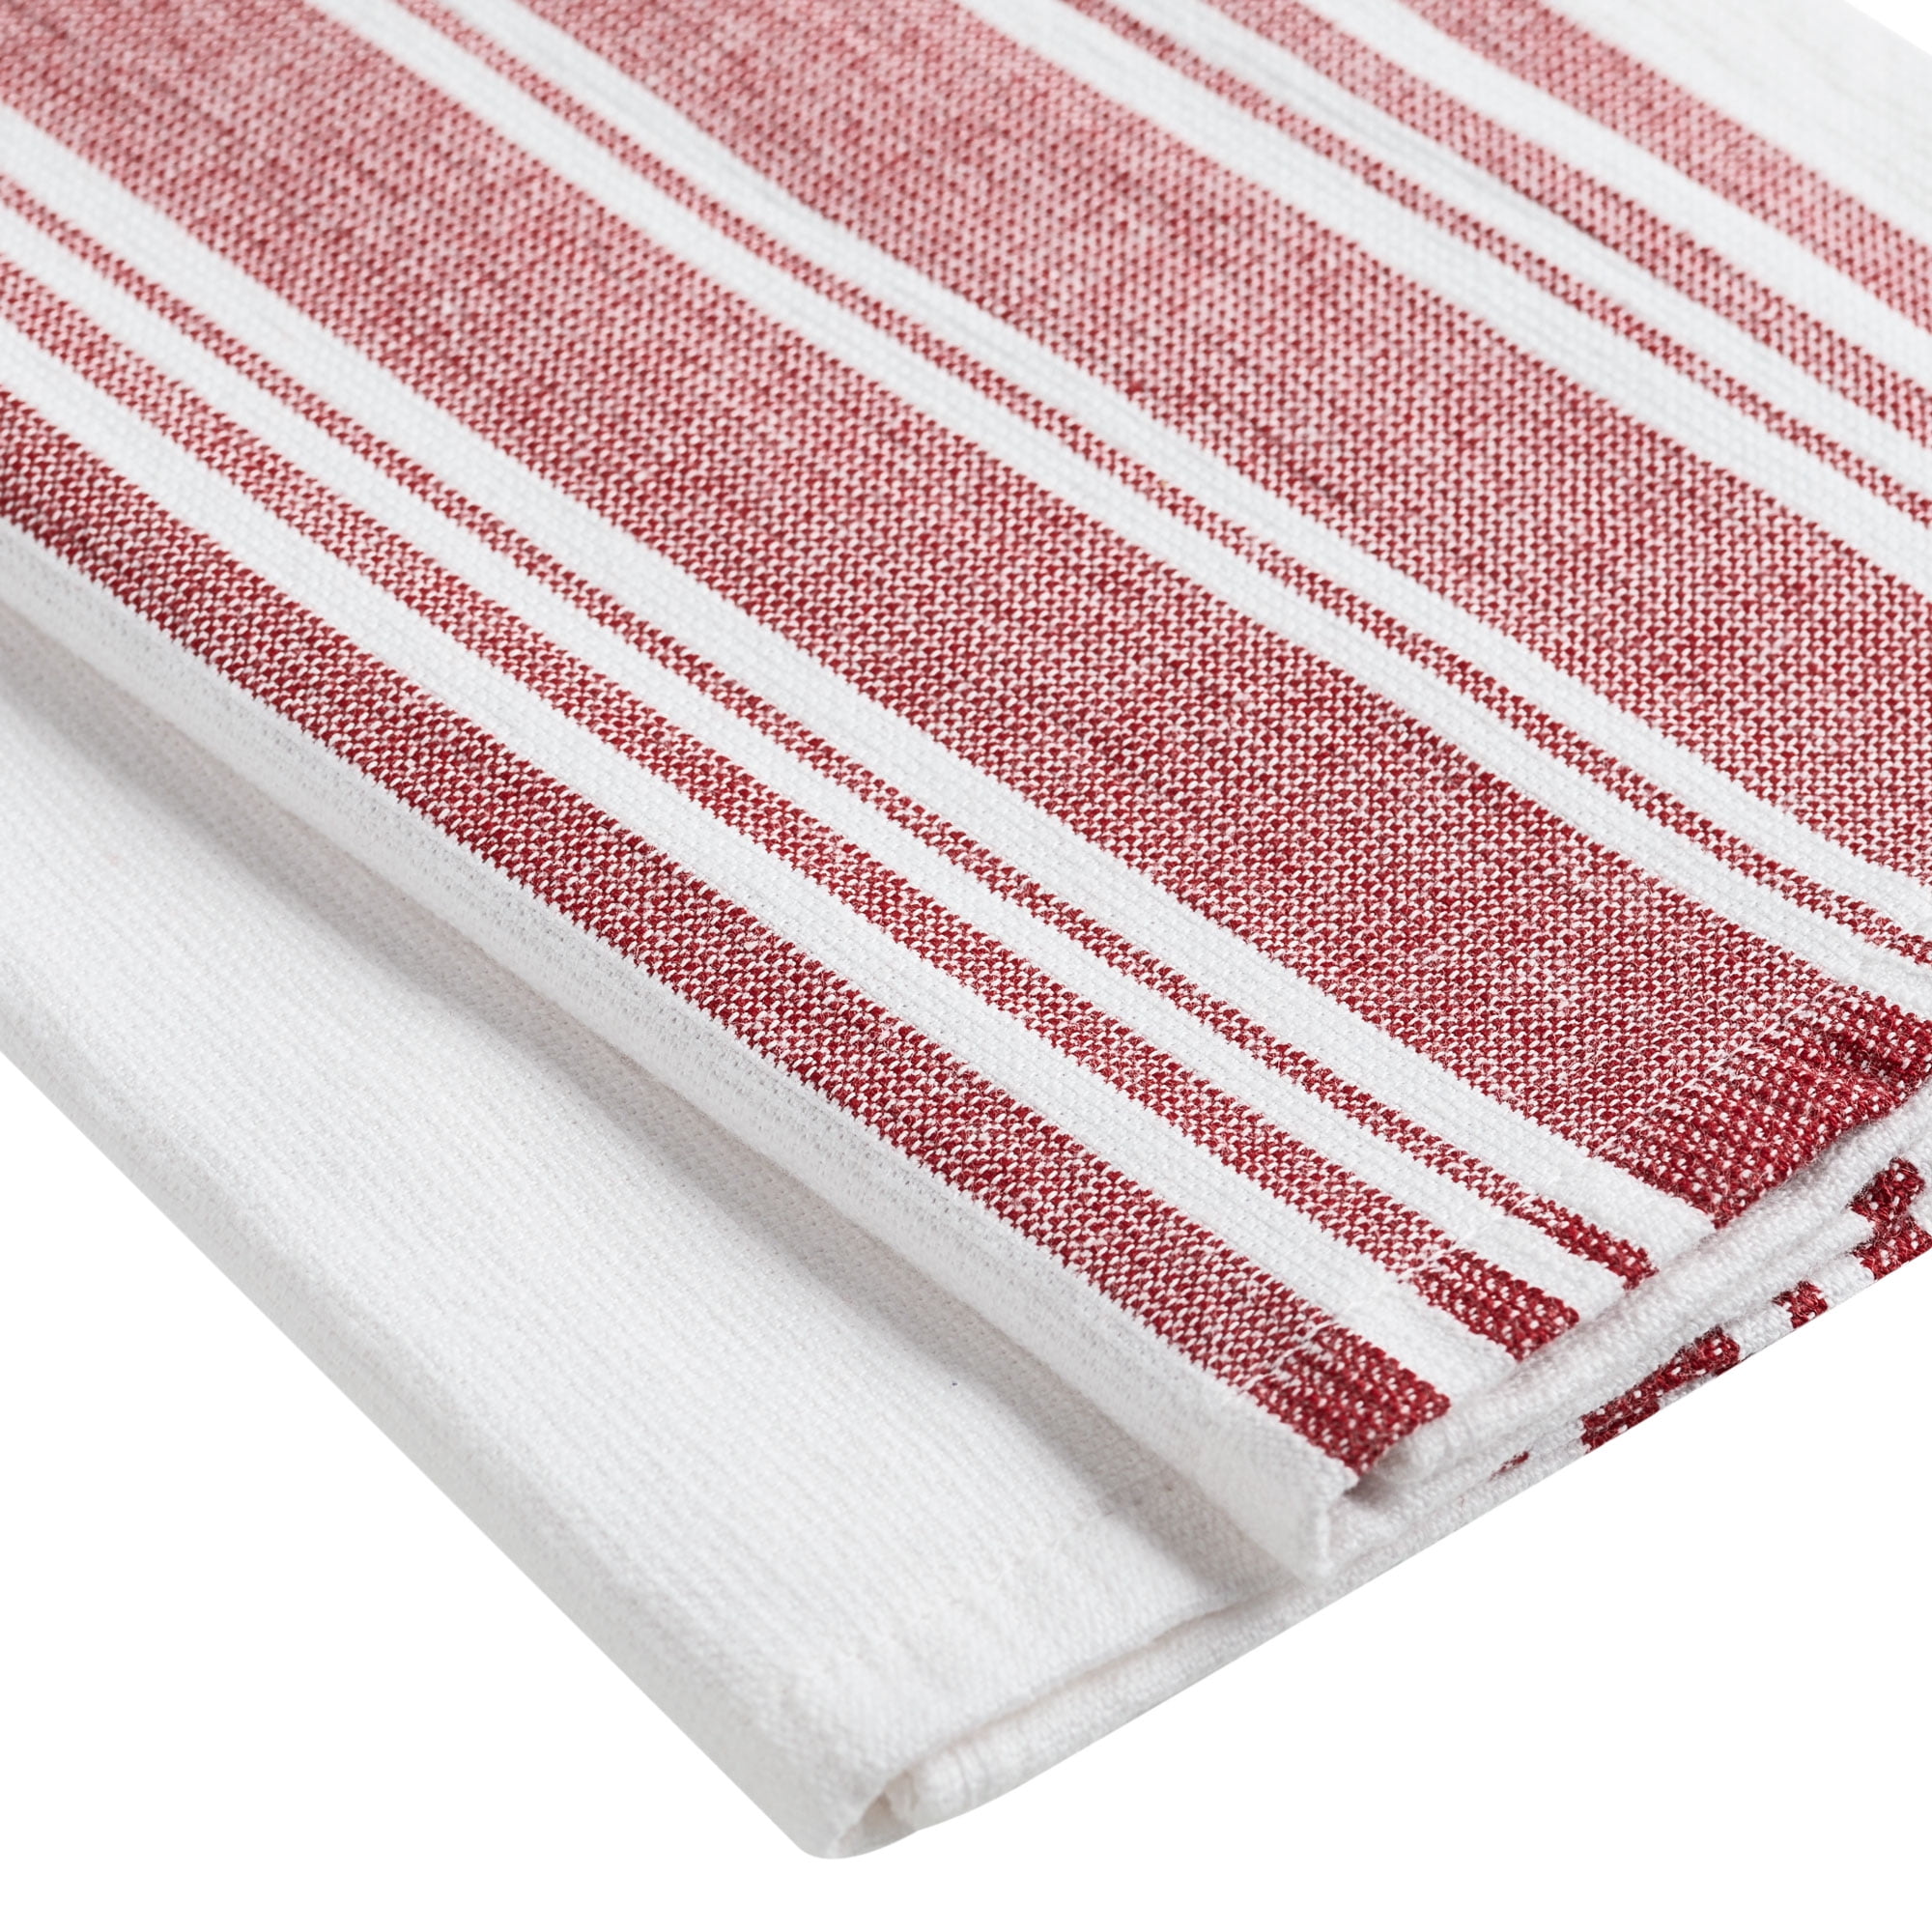 Large Kitchen Towels - Drill Weave Urban Red, Set of 3